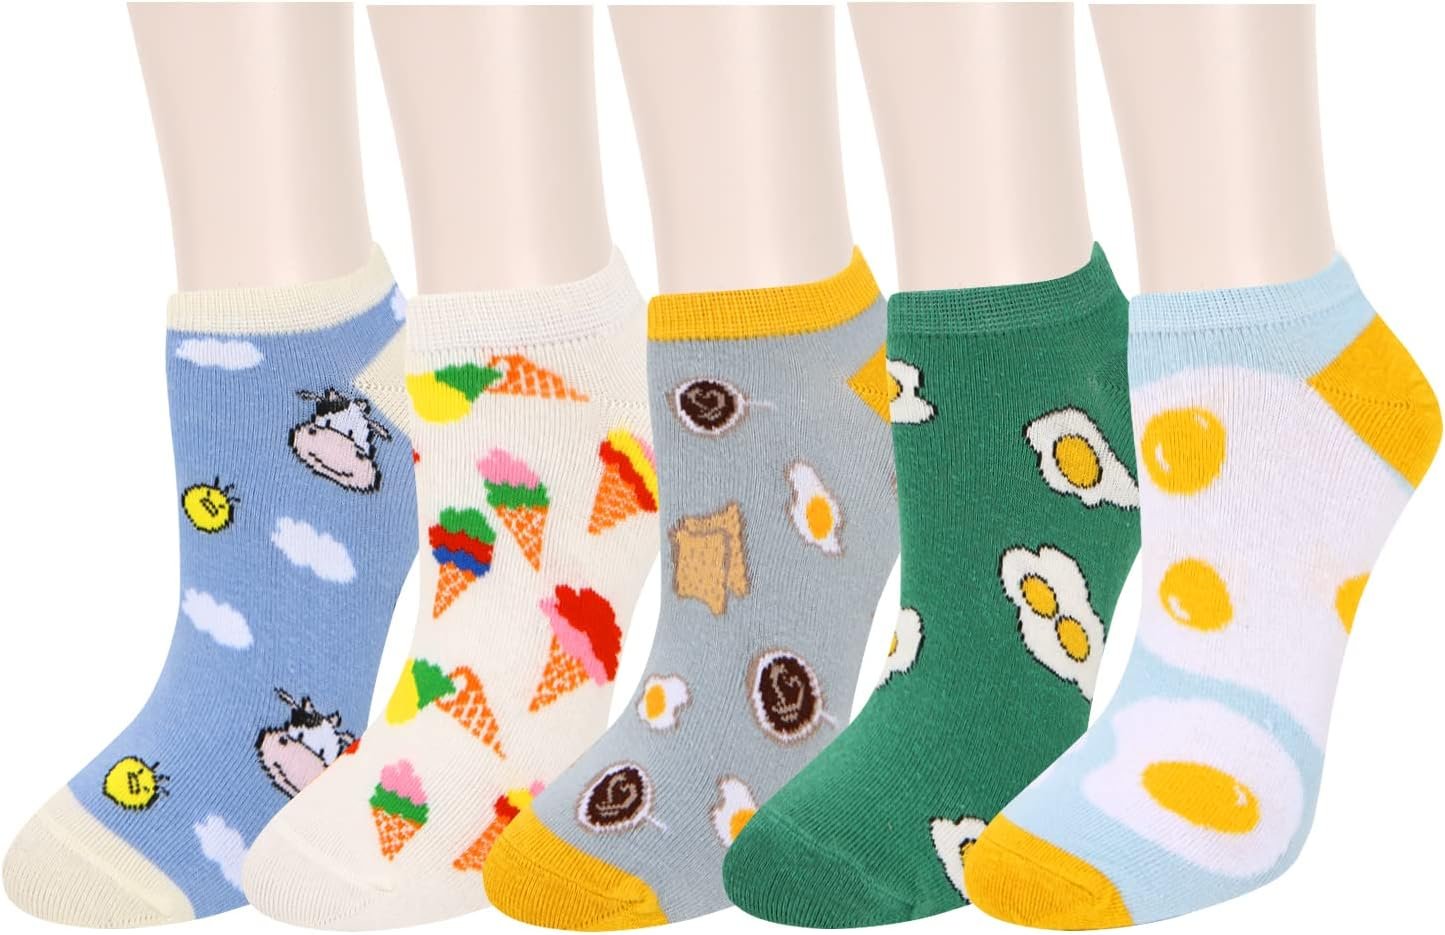 Benefeet Sox Womens Funny Ankle Socks Review